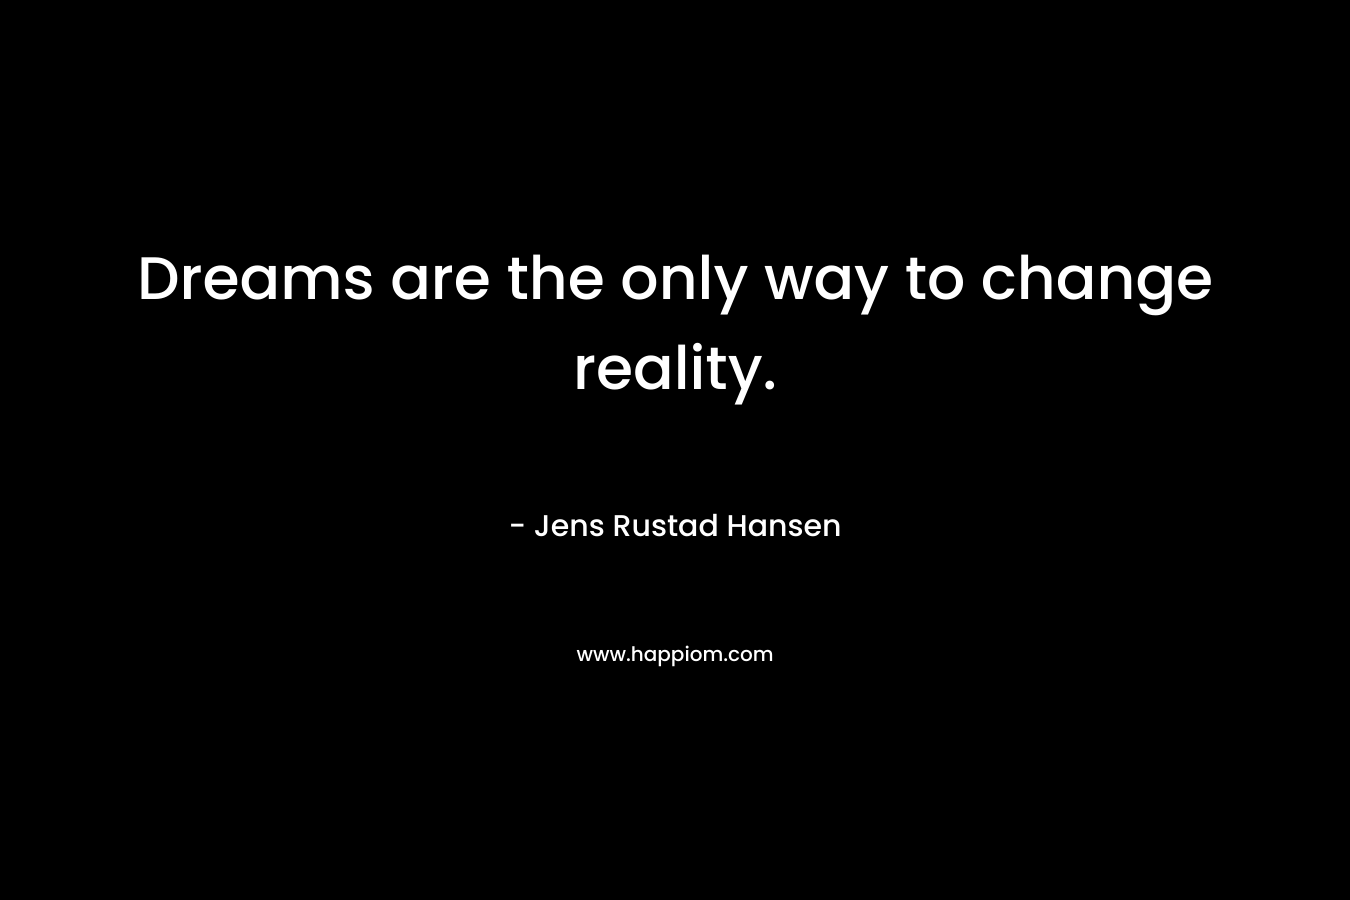 Dreams are the only way to change reality. – Jens Rustad Hansen